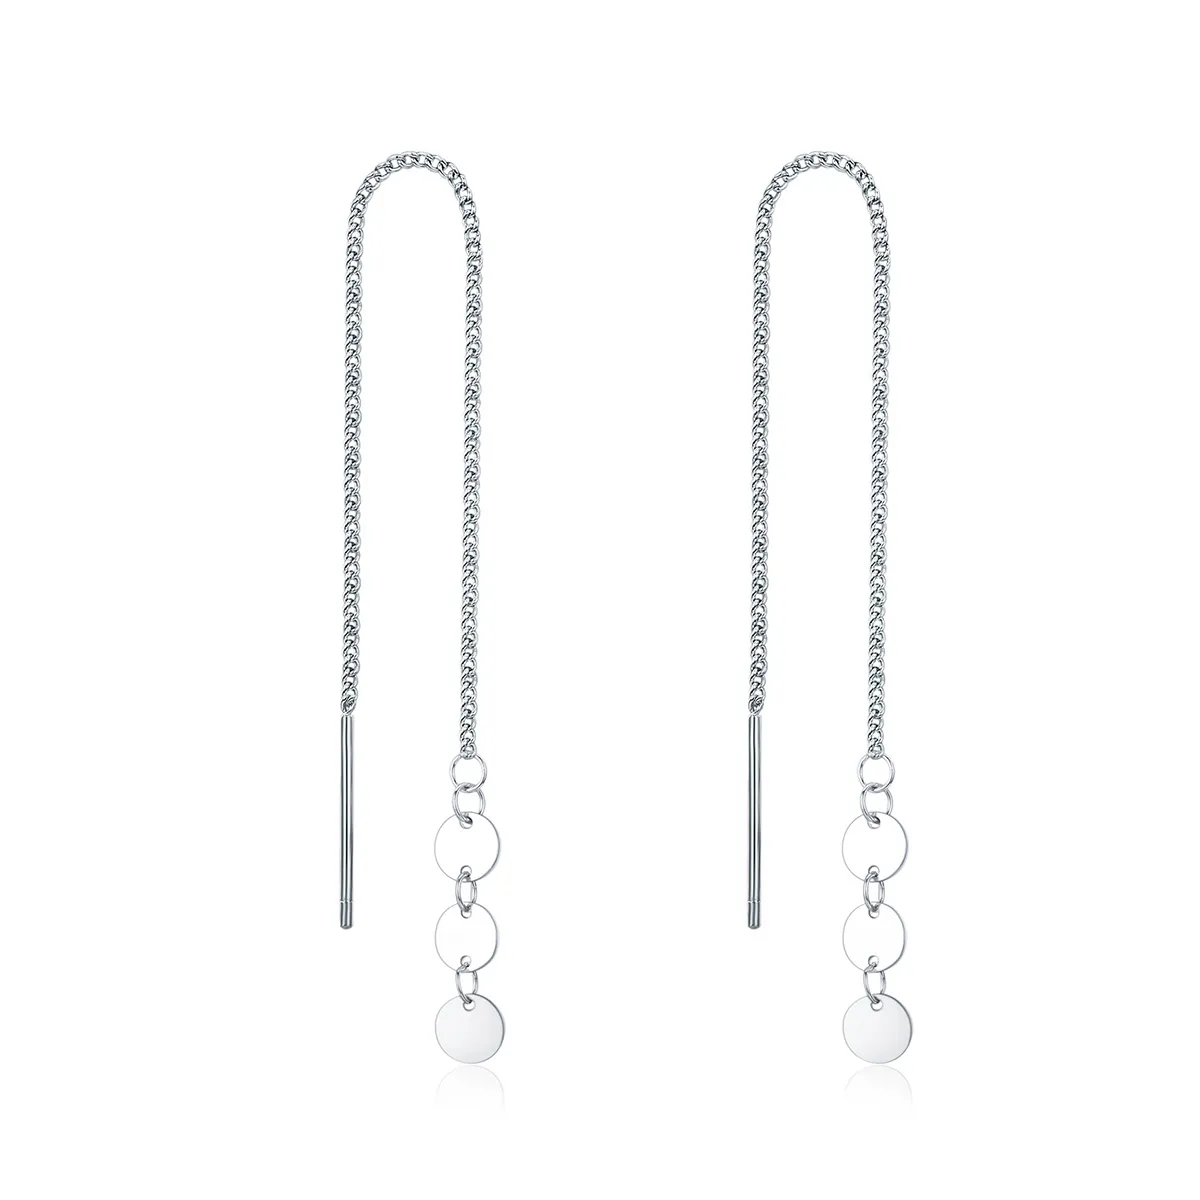 Pandora Style Silver Sequins Hanging Earrings - SCE687